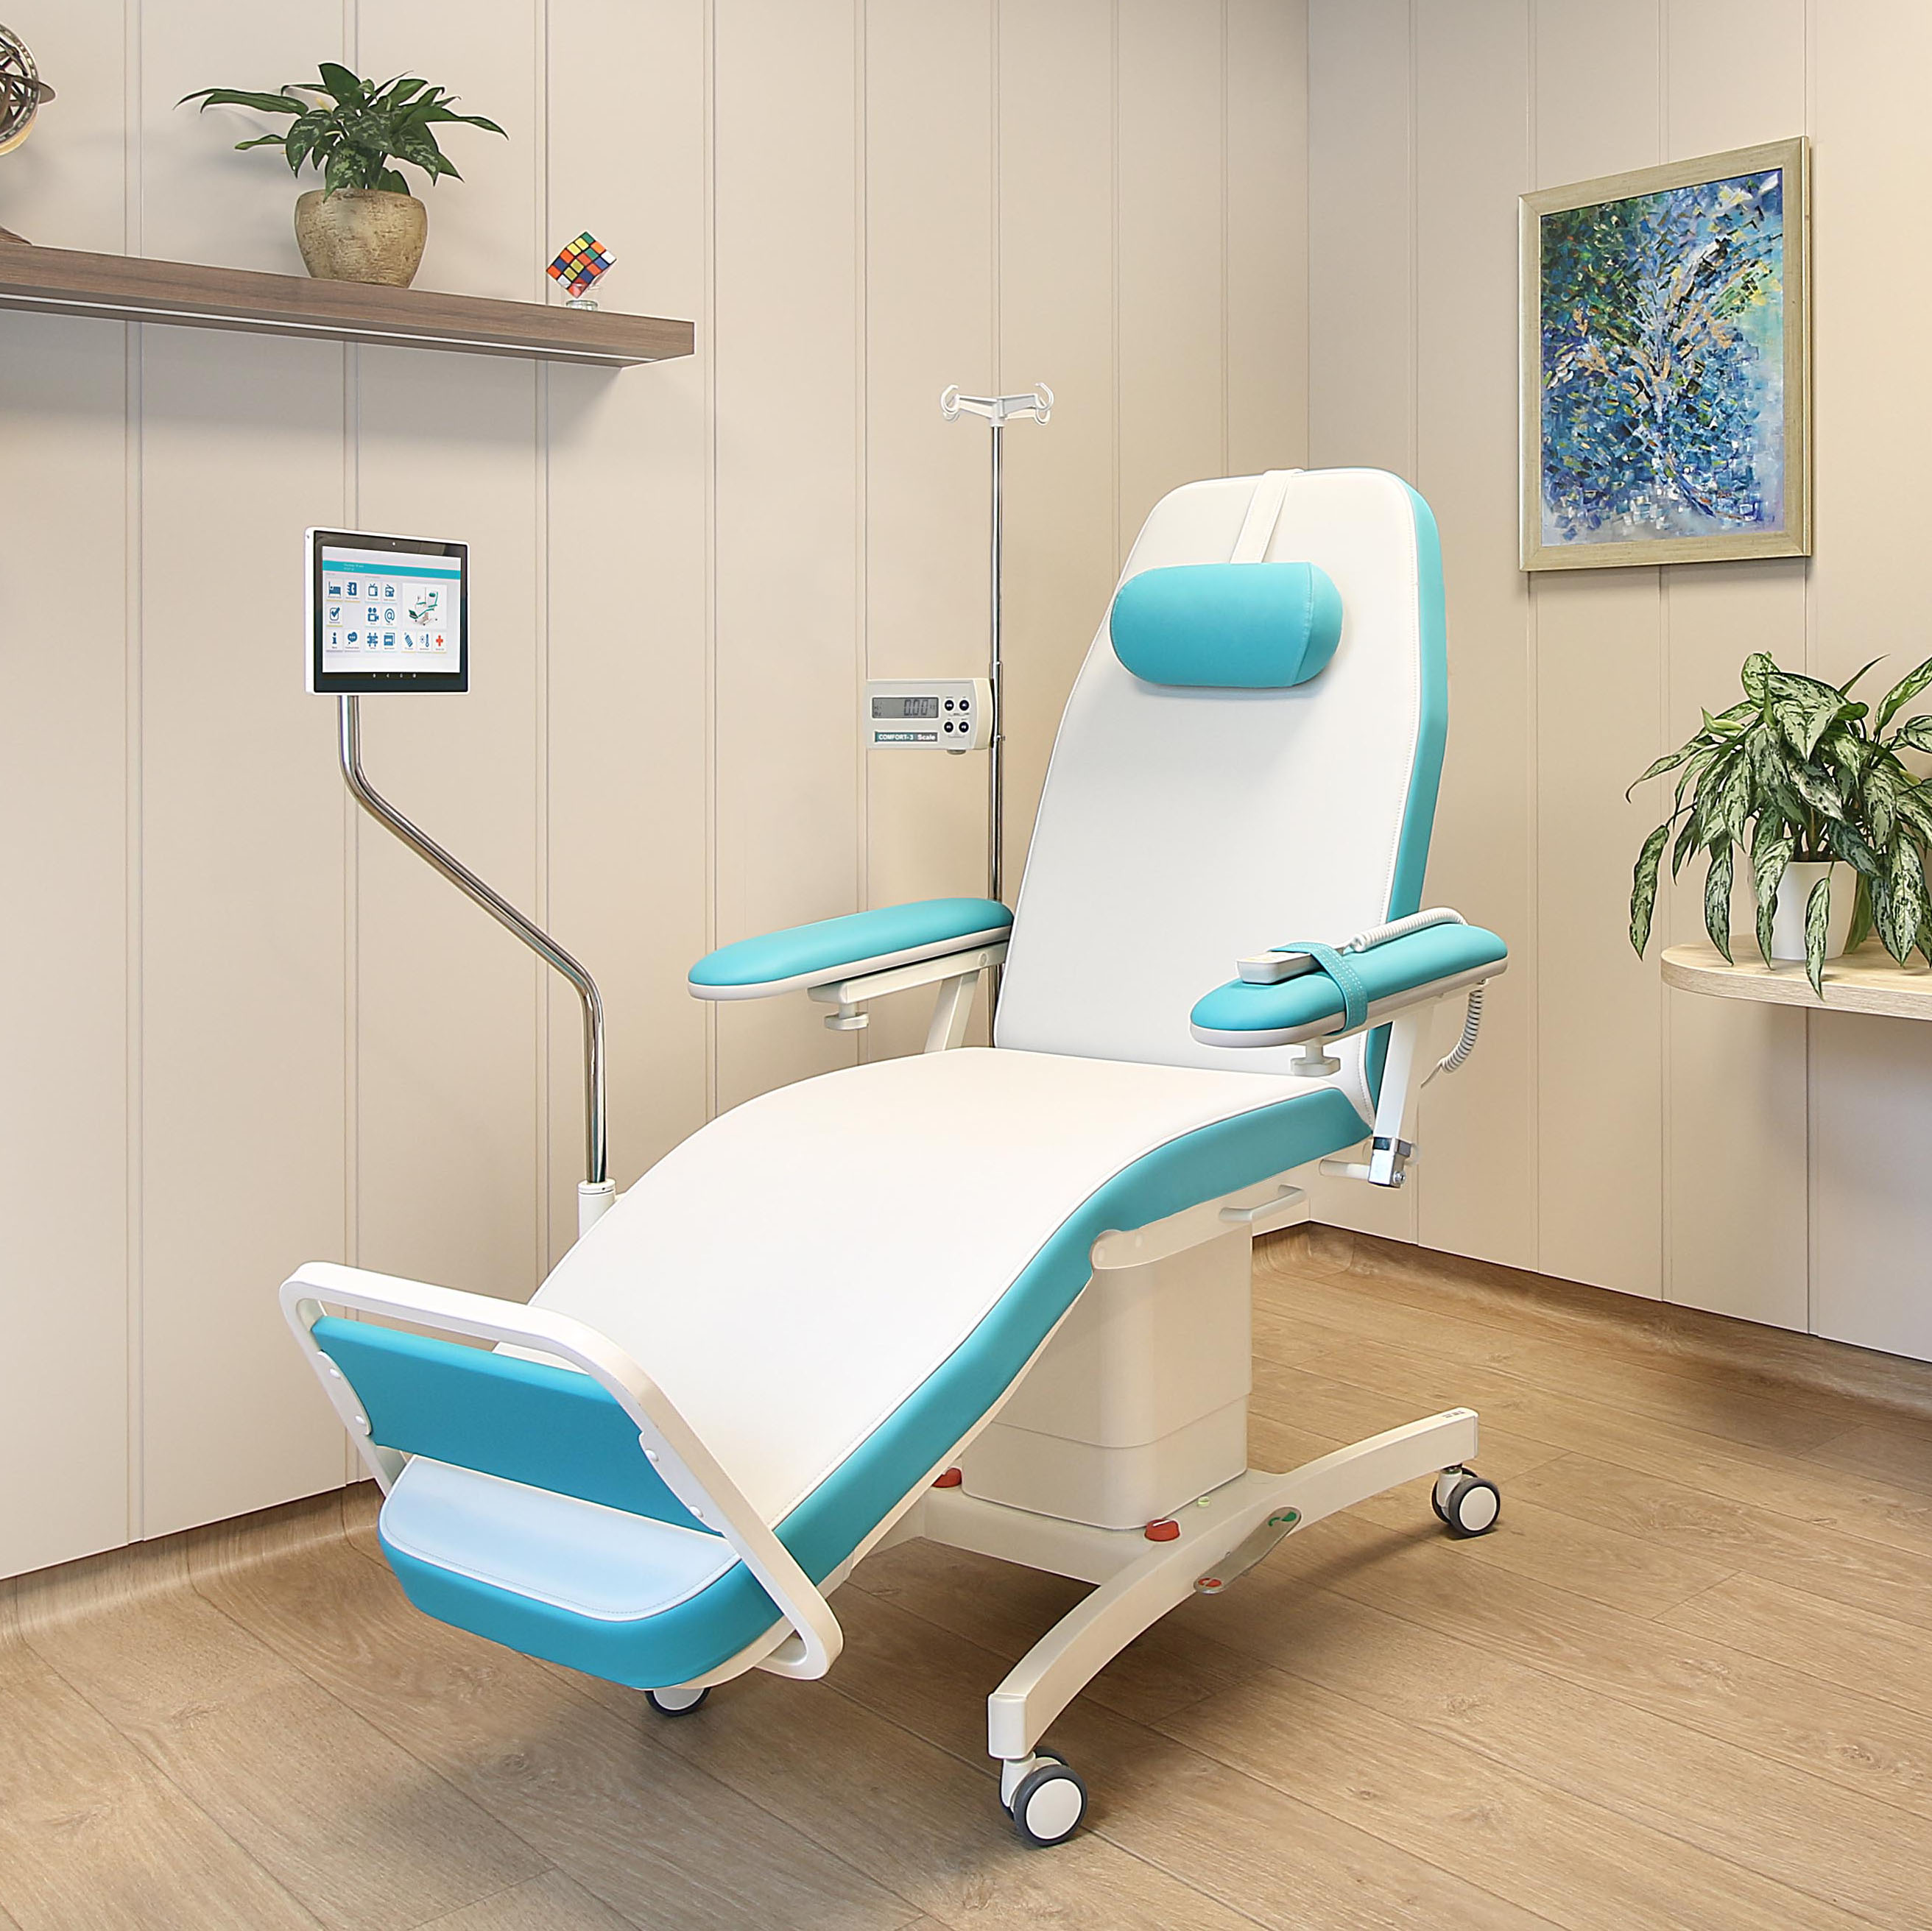 Comfort-3 Scale Dialysis-chair in Room